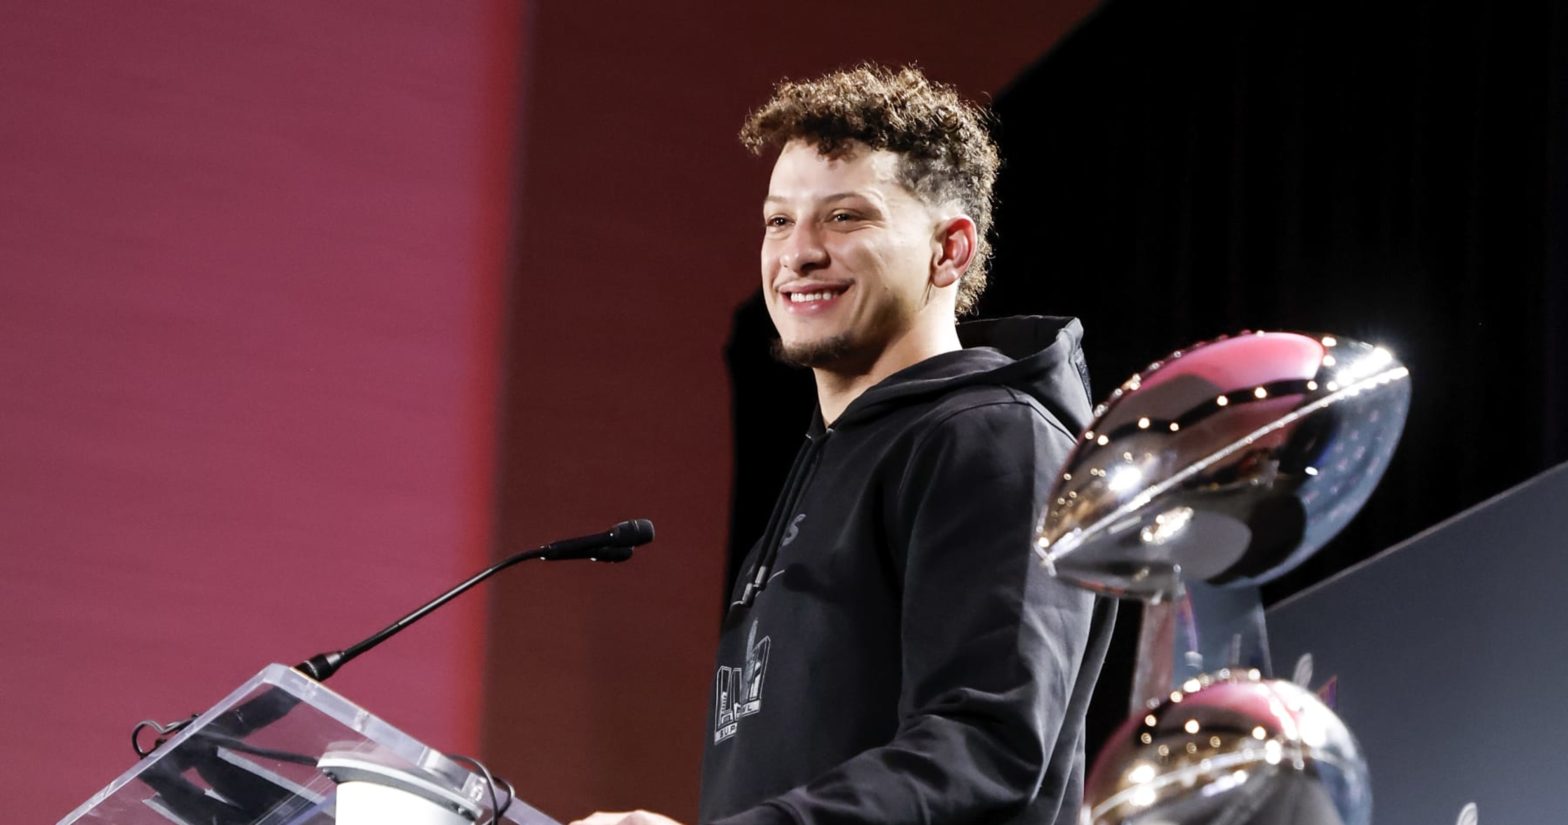 Patrick Mahomes Calls Tom Brady ‘Greatest of All Time’: I Like Being Compared to Him